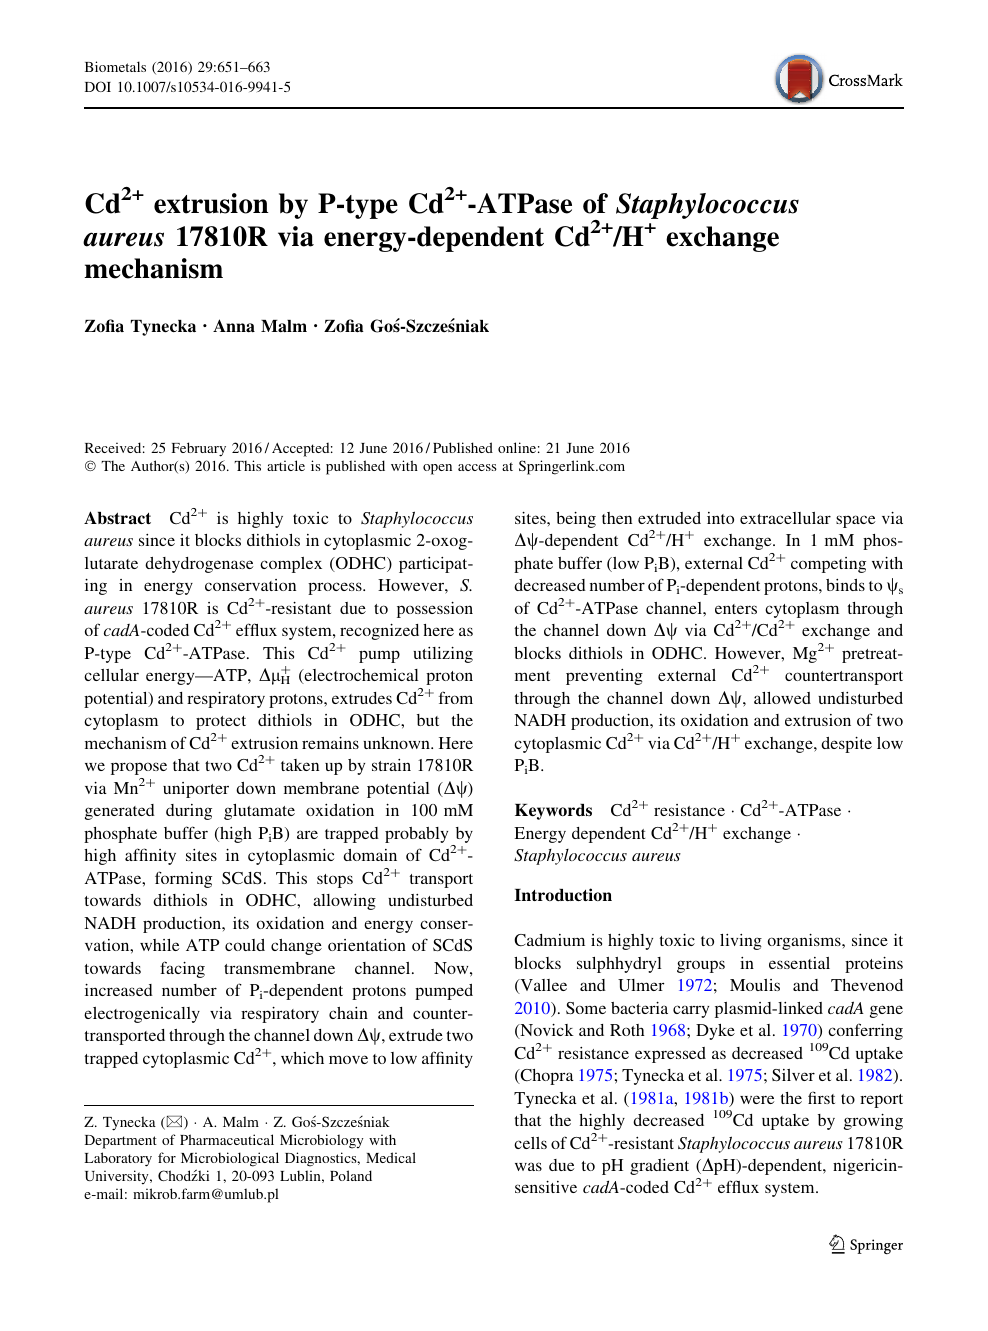 Cd2 Extrusion By P Type Cd2 Atpase Of Staphylococcus Aureus r Via Energy Dependent Cd2 H Exchange Mechanism Topic Of Research Paper In Biological Sciences Download Scholarly Article Pdf And Read For Free On Cyberleninka